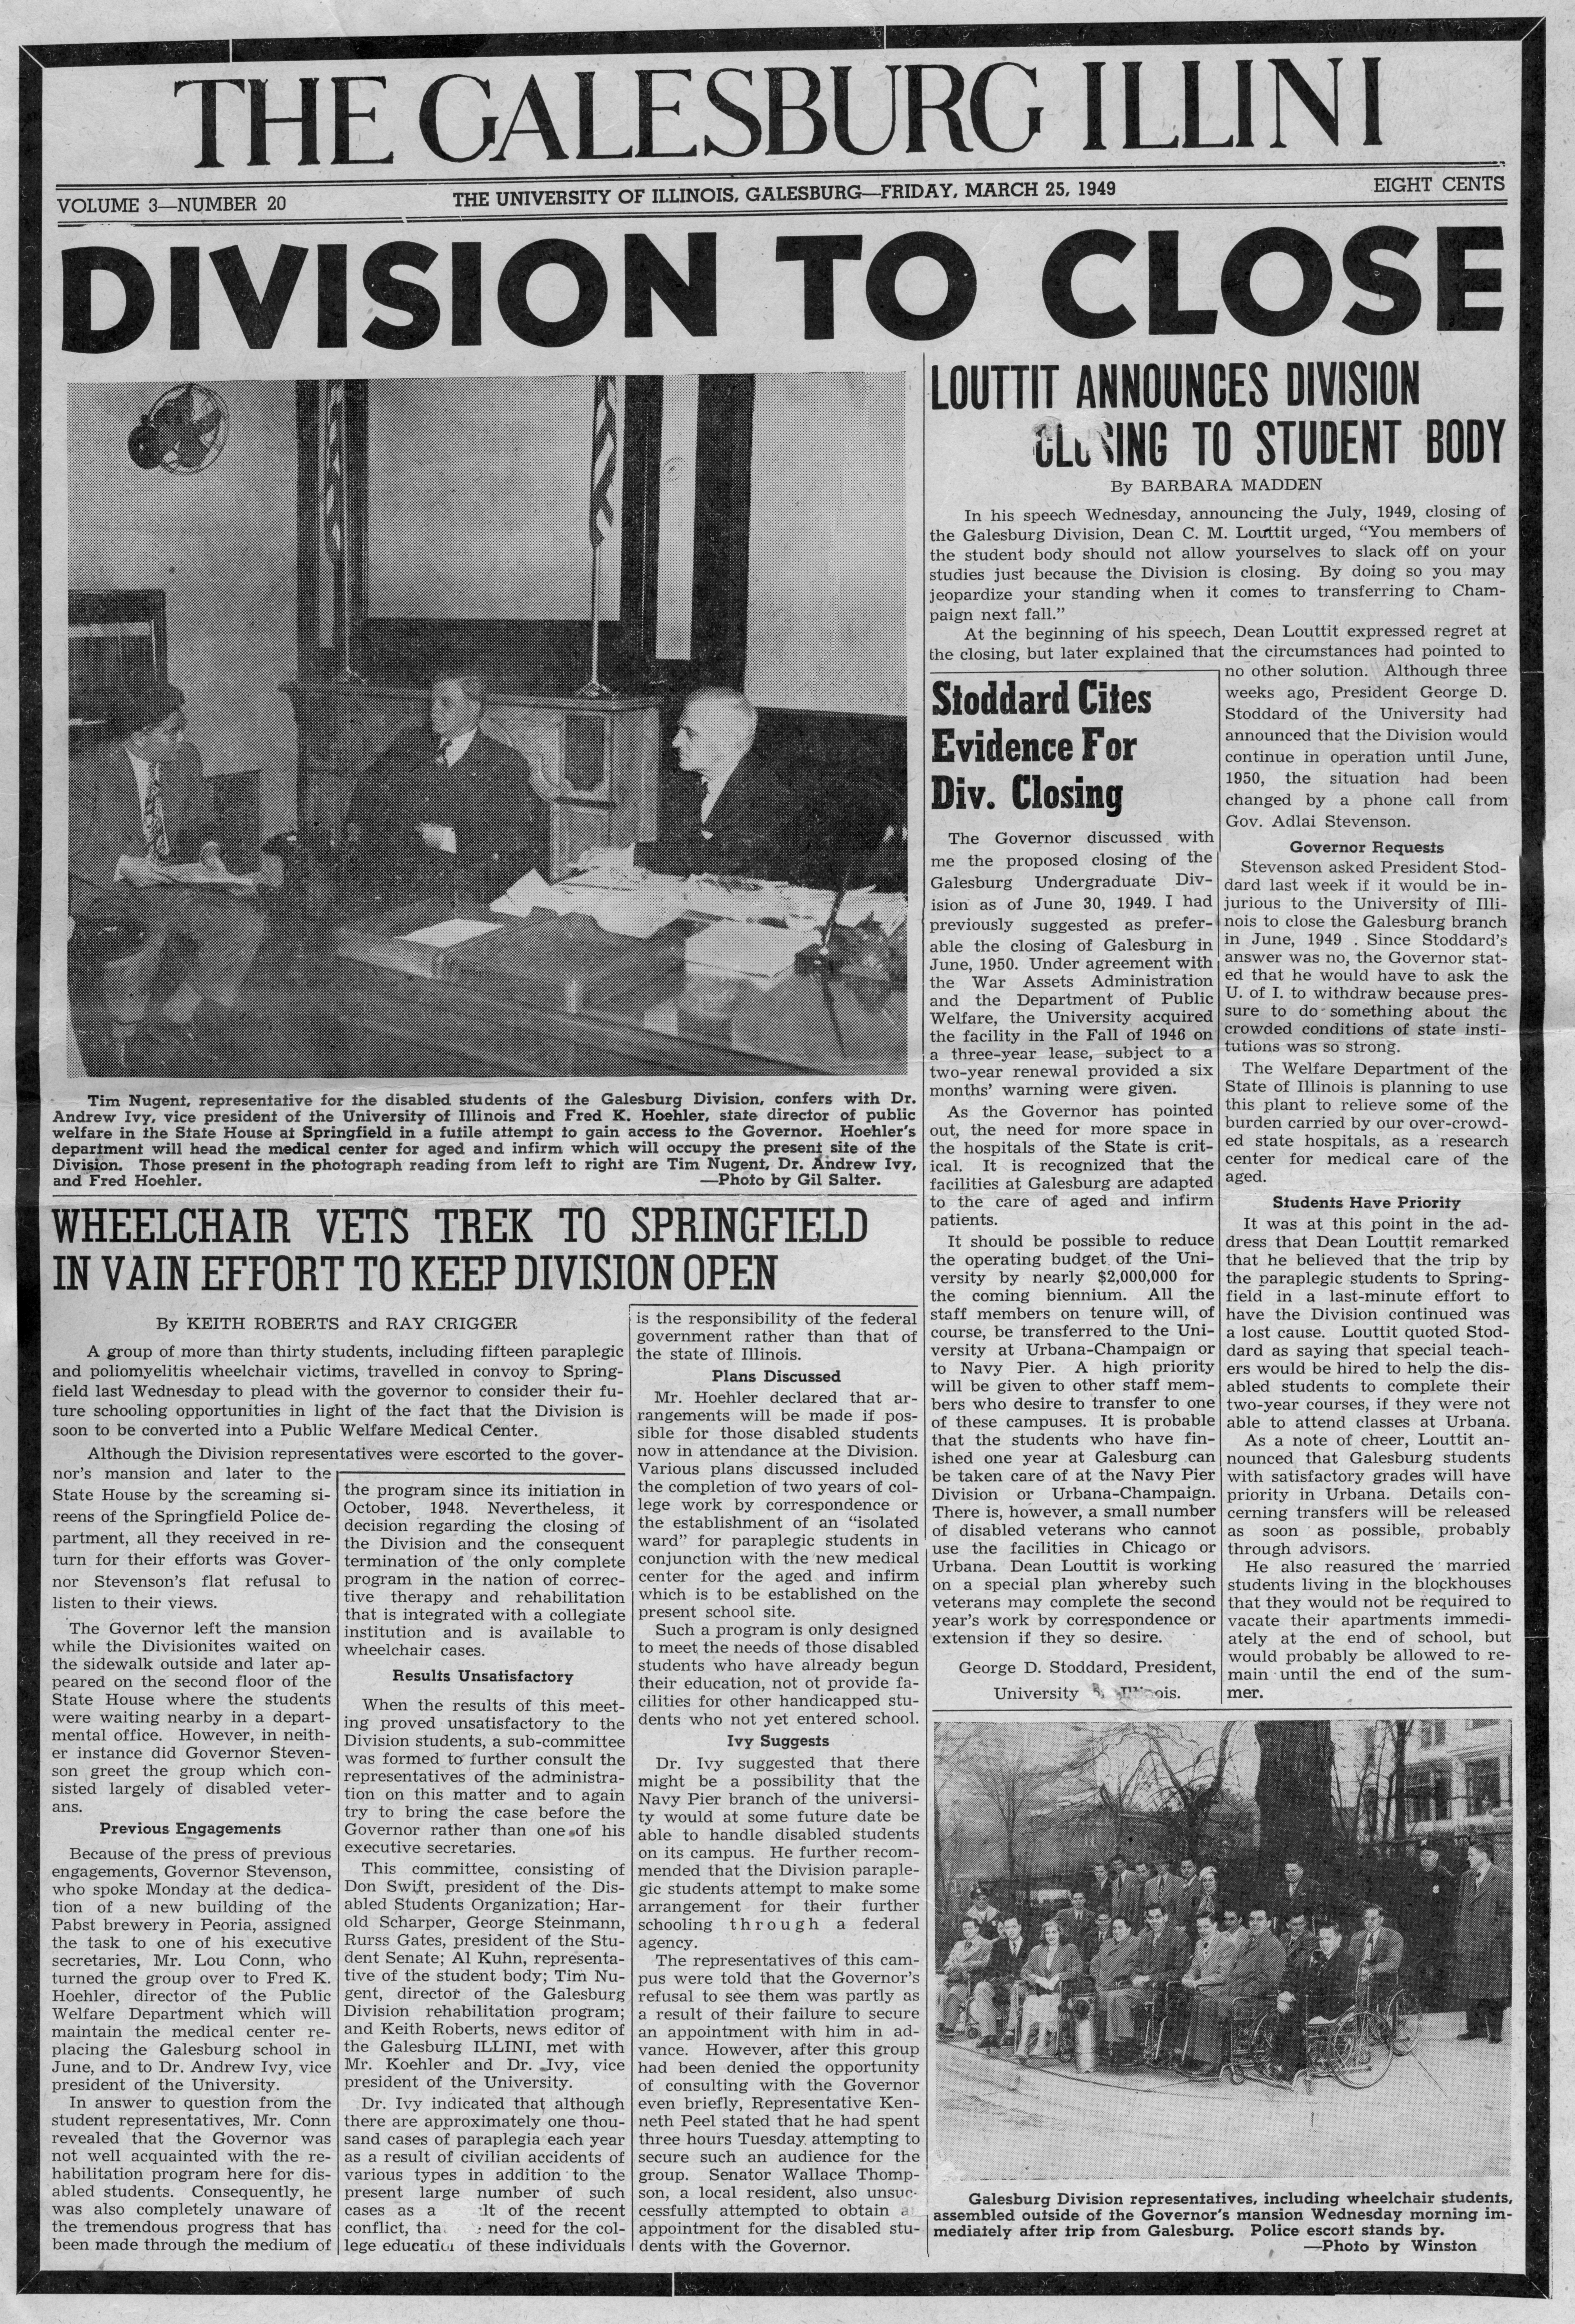 Galesburg Illini, Front Page Article
March 25, 1949